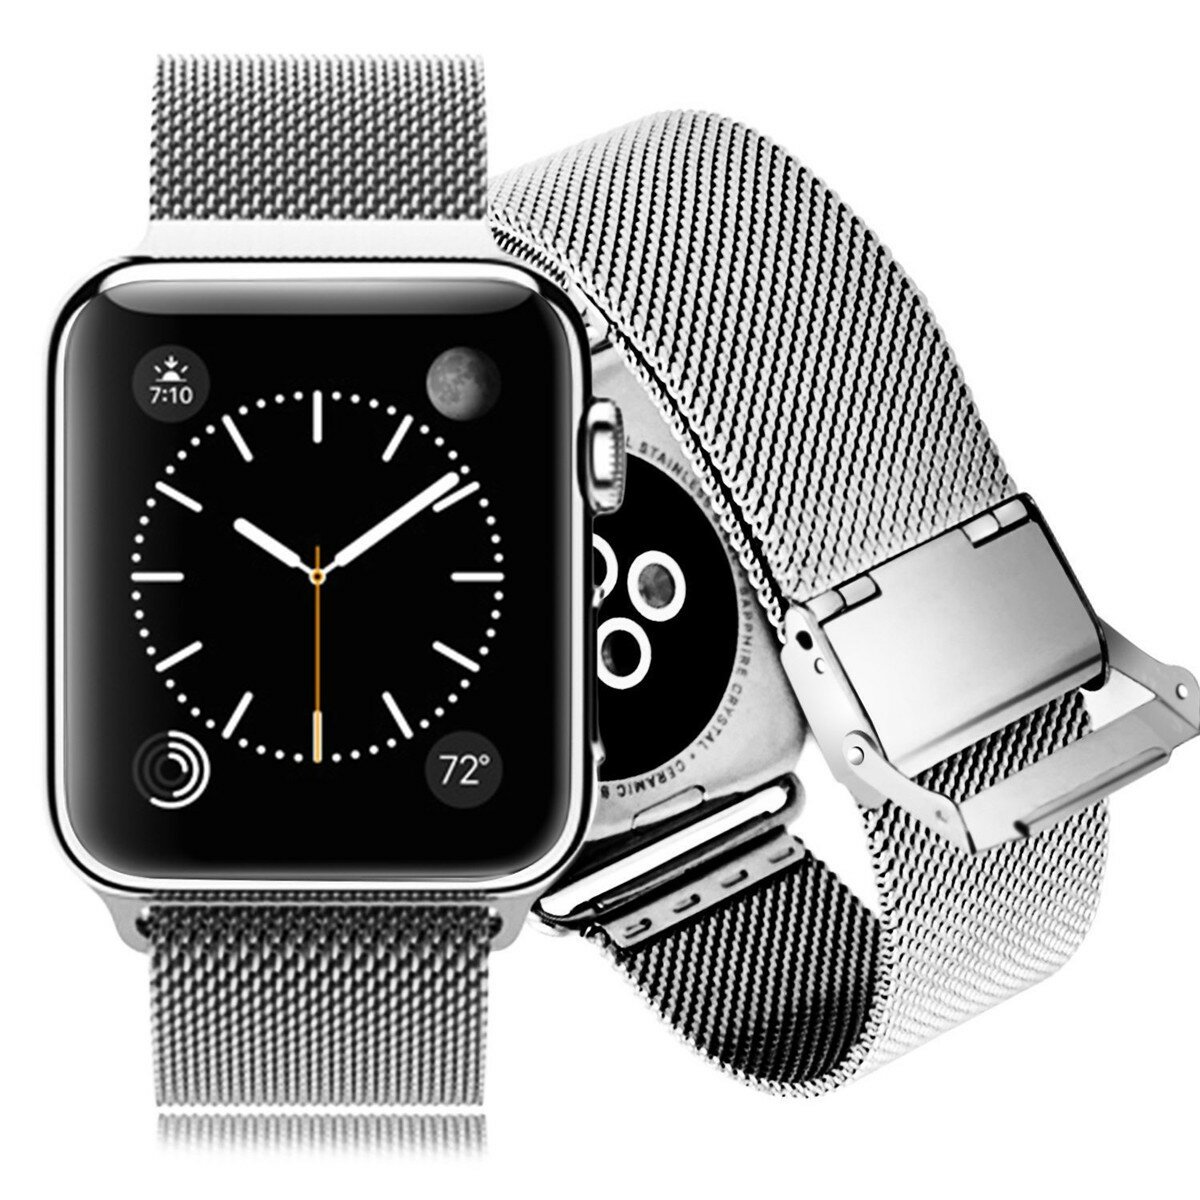 Buckle Stainless Steel Smart Watch Band Replacement Strap for Apple Watch 38MM